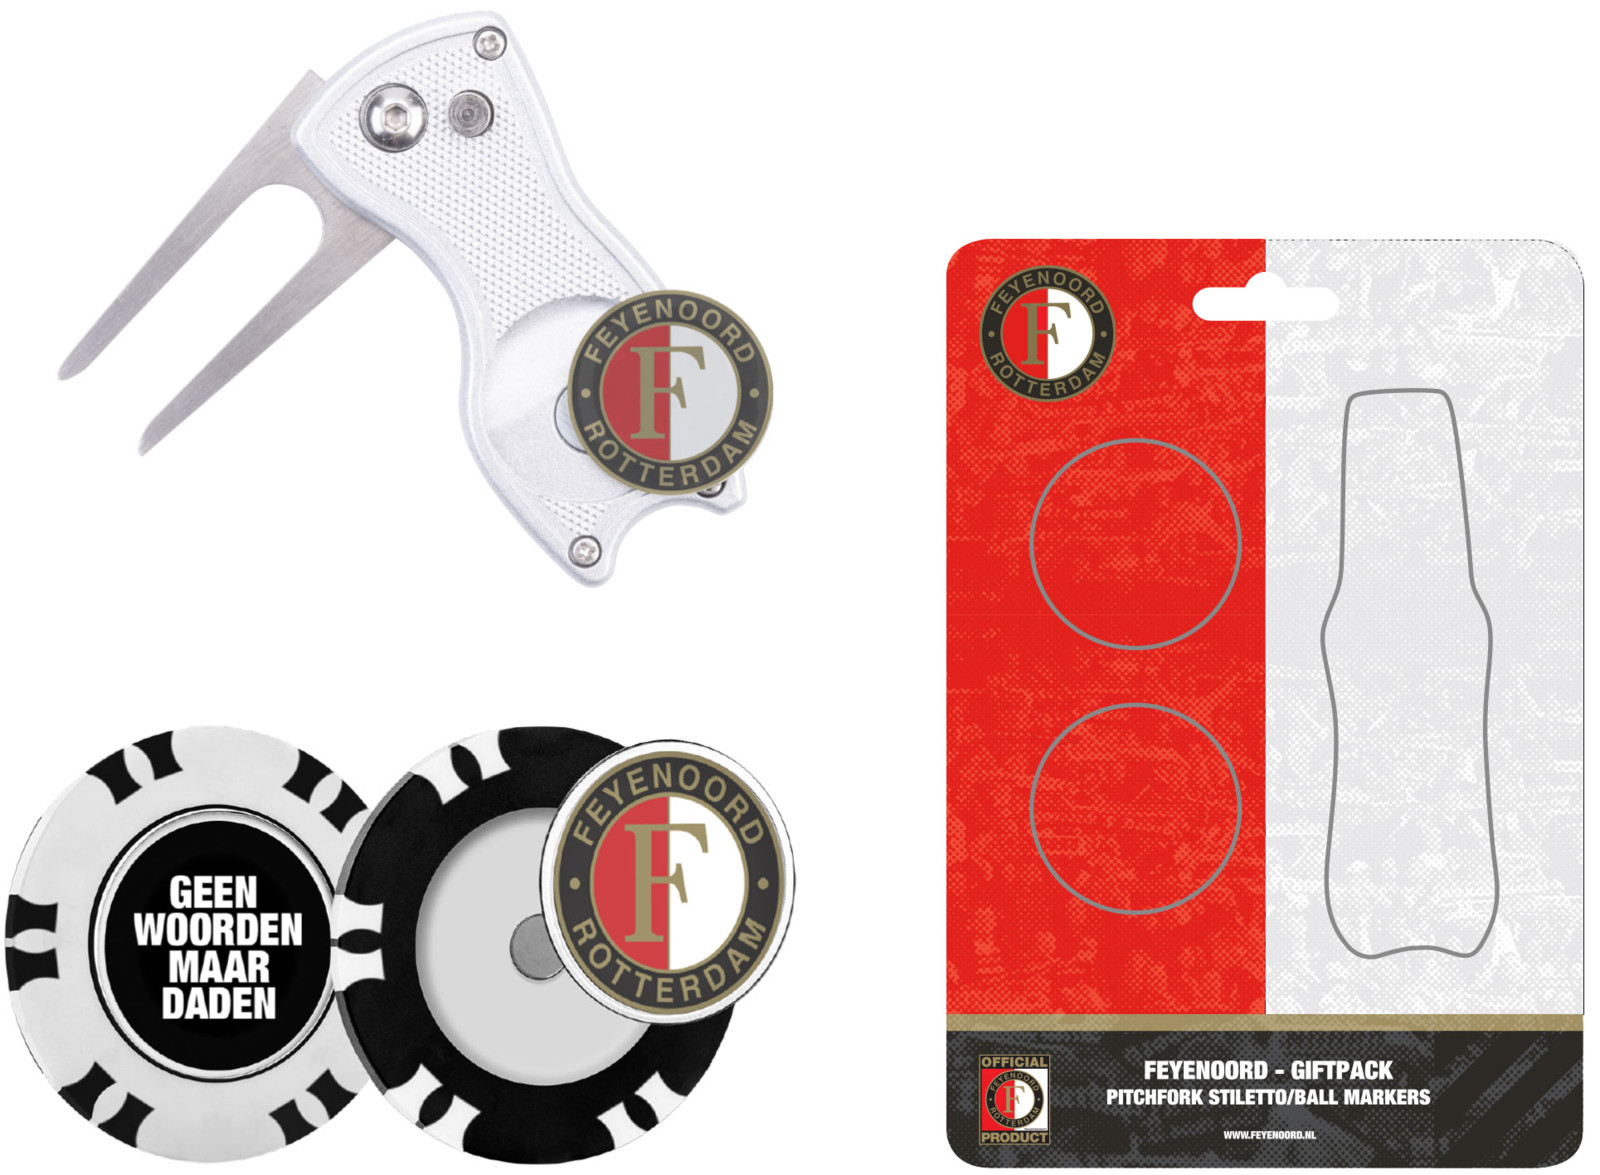 Feyenoord | Giftpack Poker Chip and Pitch Fork | Limited Edition